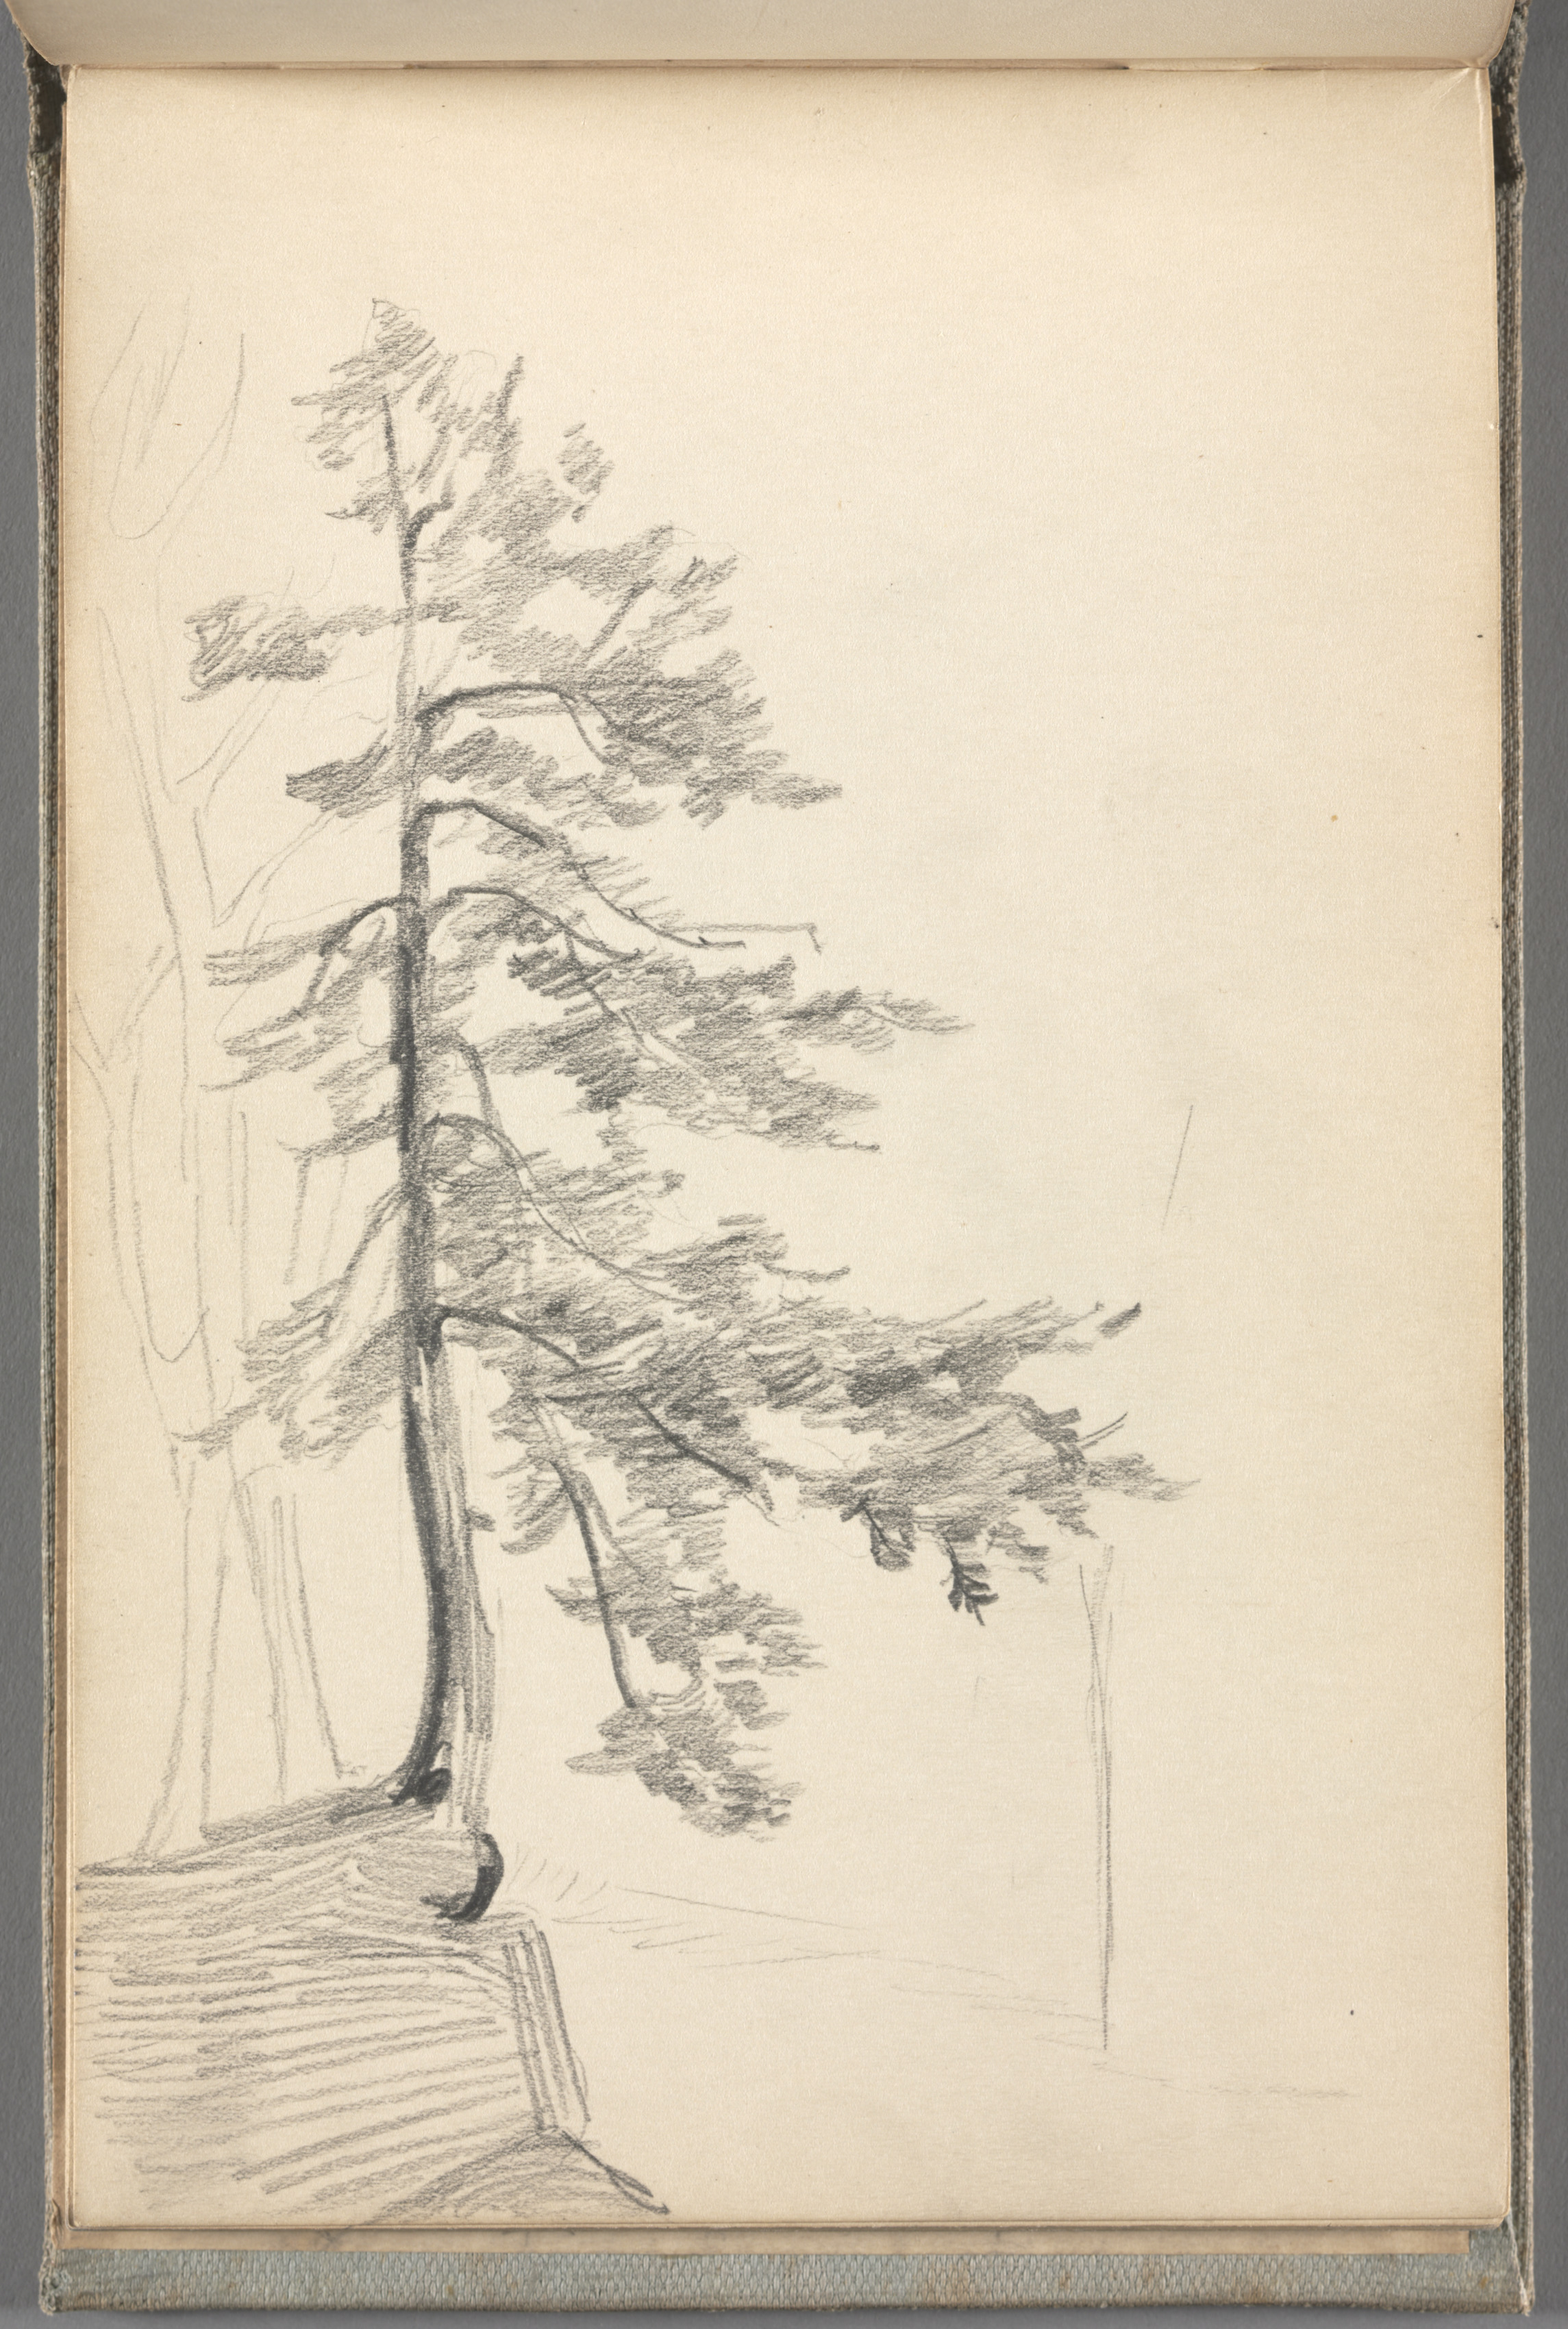 Sketchbook No. 5, page 36: Pencil drawing of a tree